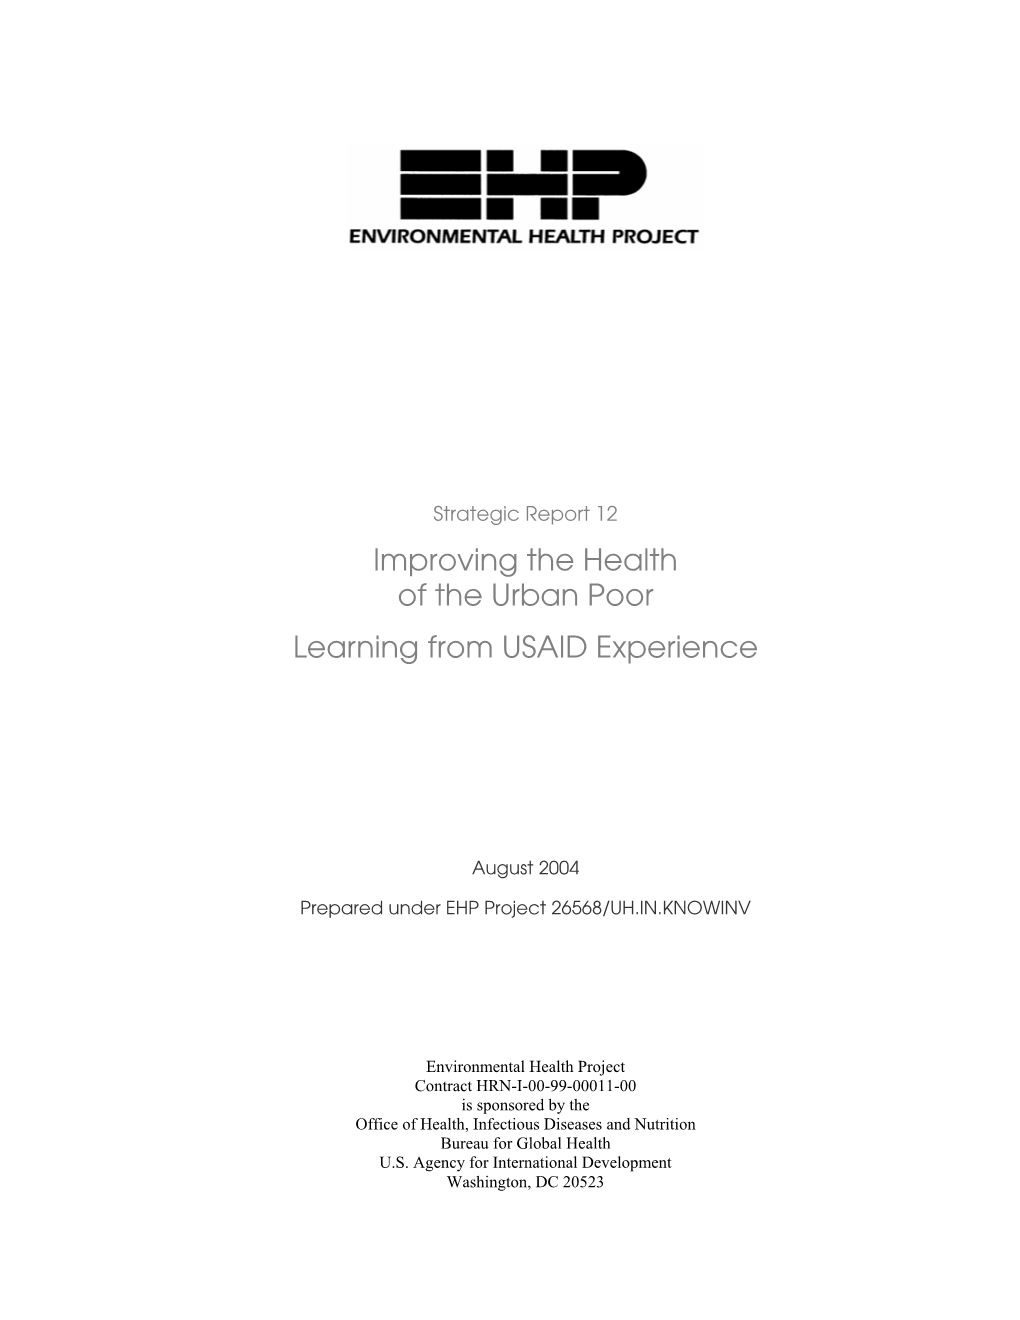 Improving the Health of the Urban Poor Learning from USAID Experience